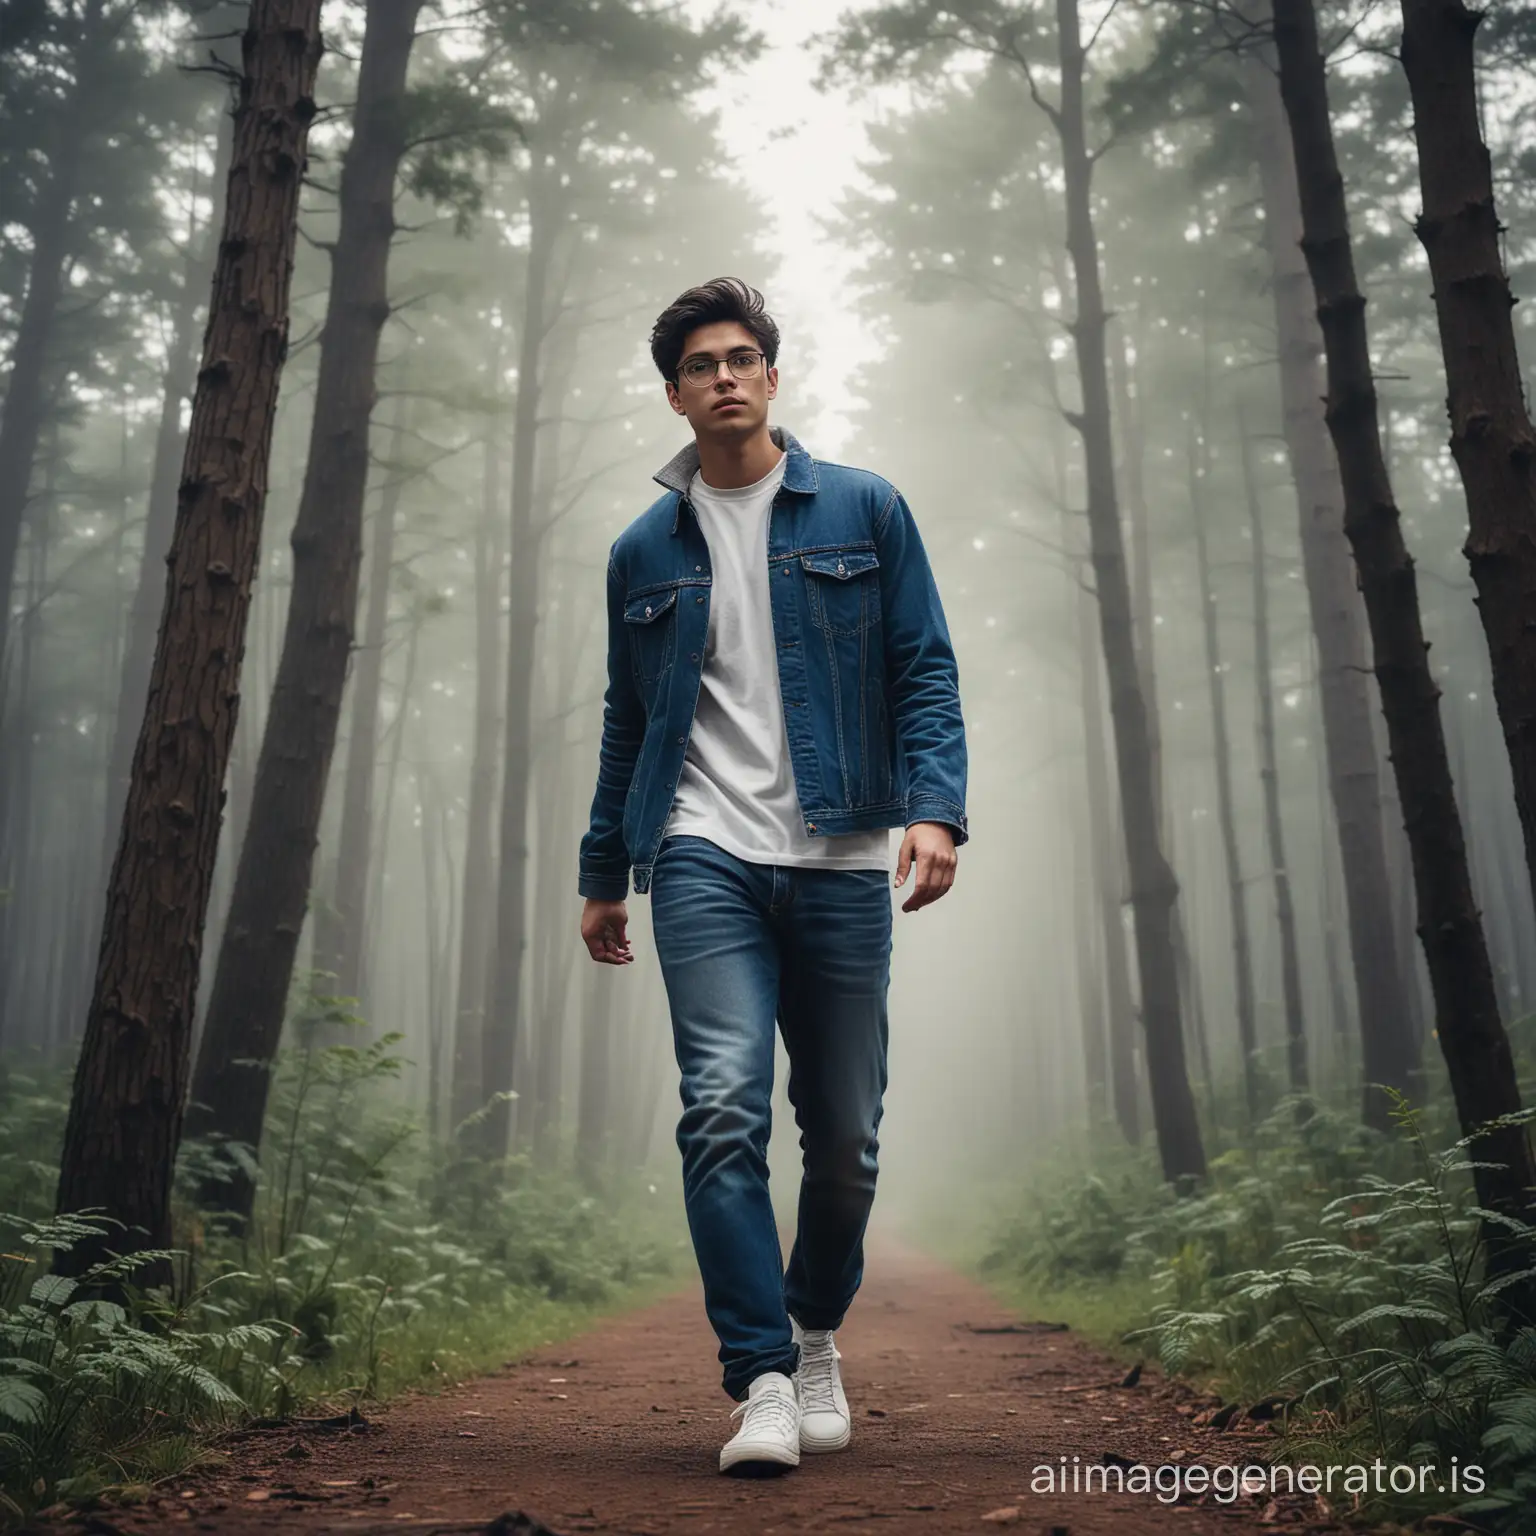 full body shoot, wide shoot, cinematic portrait of handsome 20 years old man, glasses, with very short cut black hair, wearing denim jeans and white sneakers Tommy Hilfiger shoes, walking in misty forest, tall tree, lonely handsome man, wearing a Tommy Hilfiger crewneck, artistic portrait, calm and quiet atmosphere, bokeh background showing a misty forest, high and detail camera, handsome pose, looked up at the sky